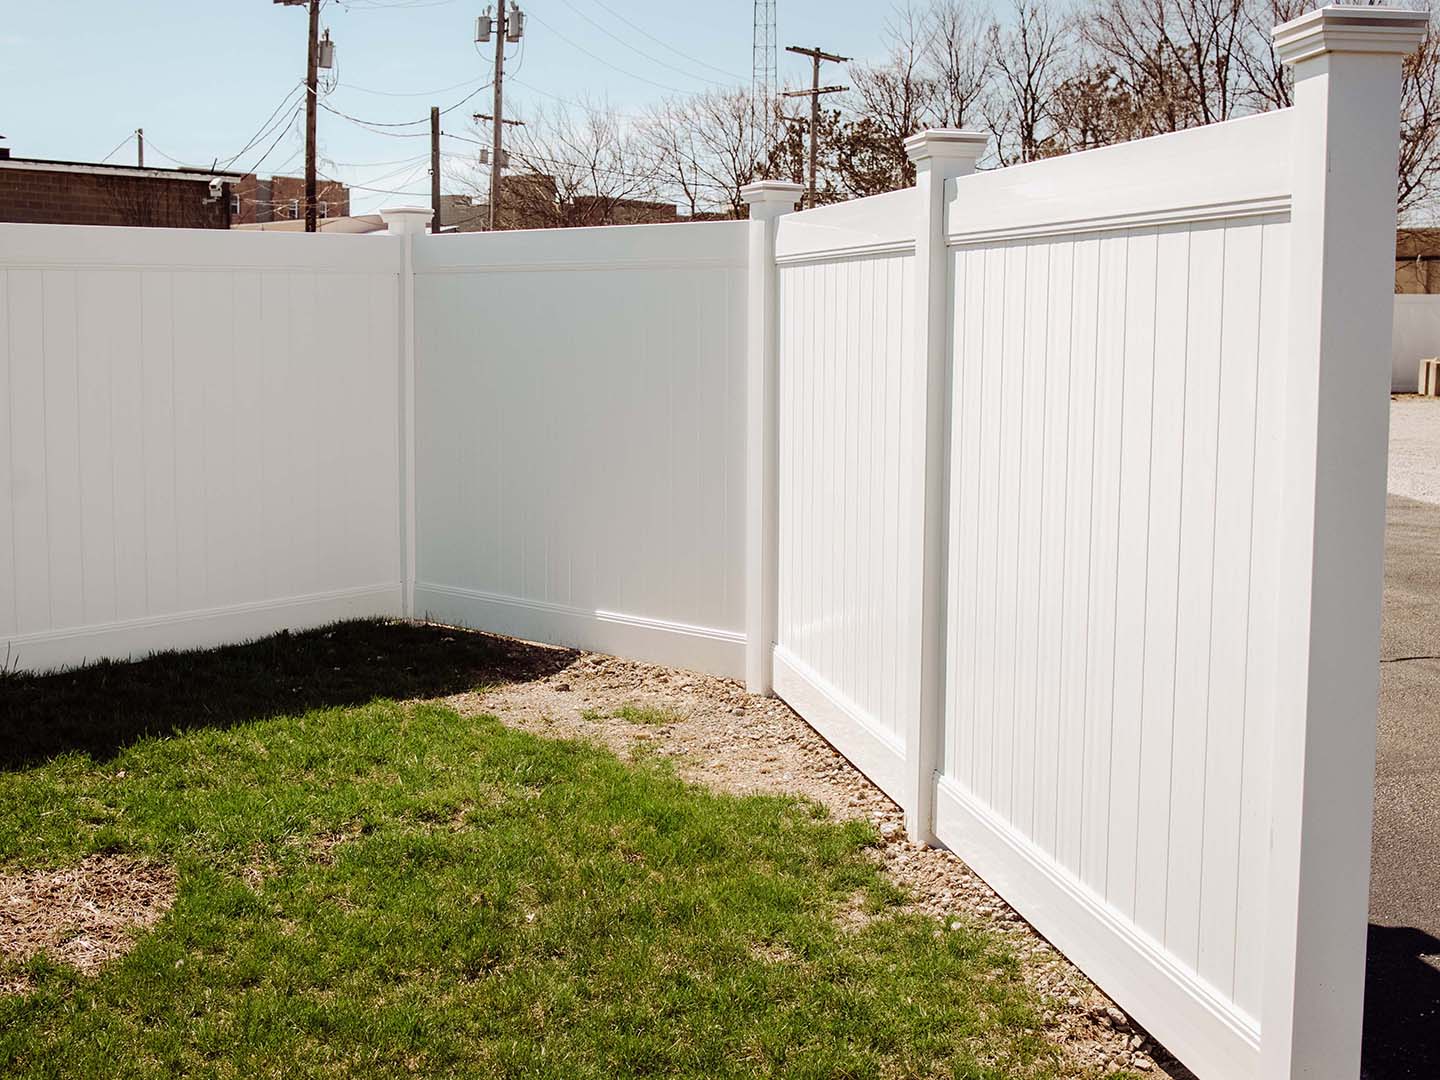 Kouts Indiana vinyl privacy fencing